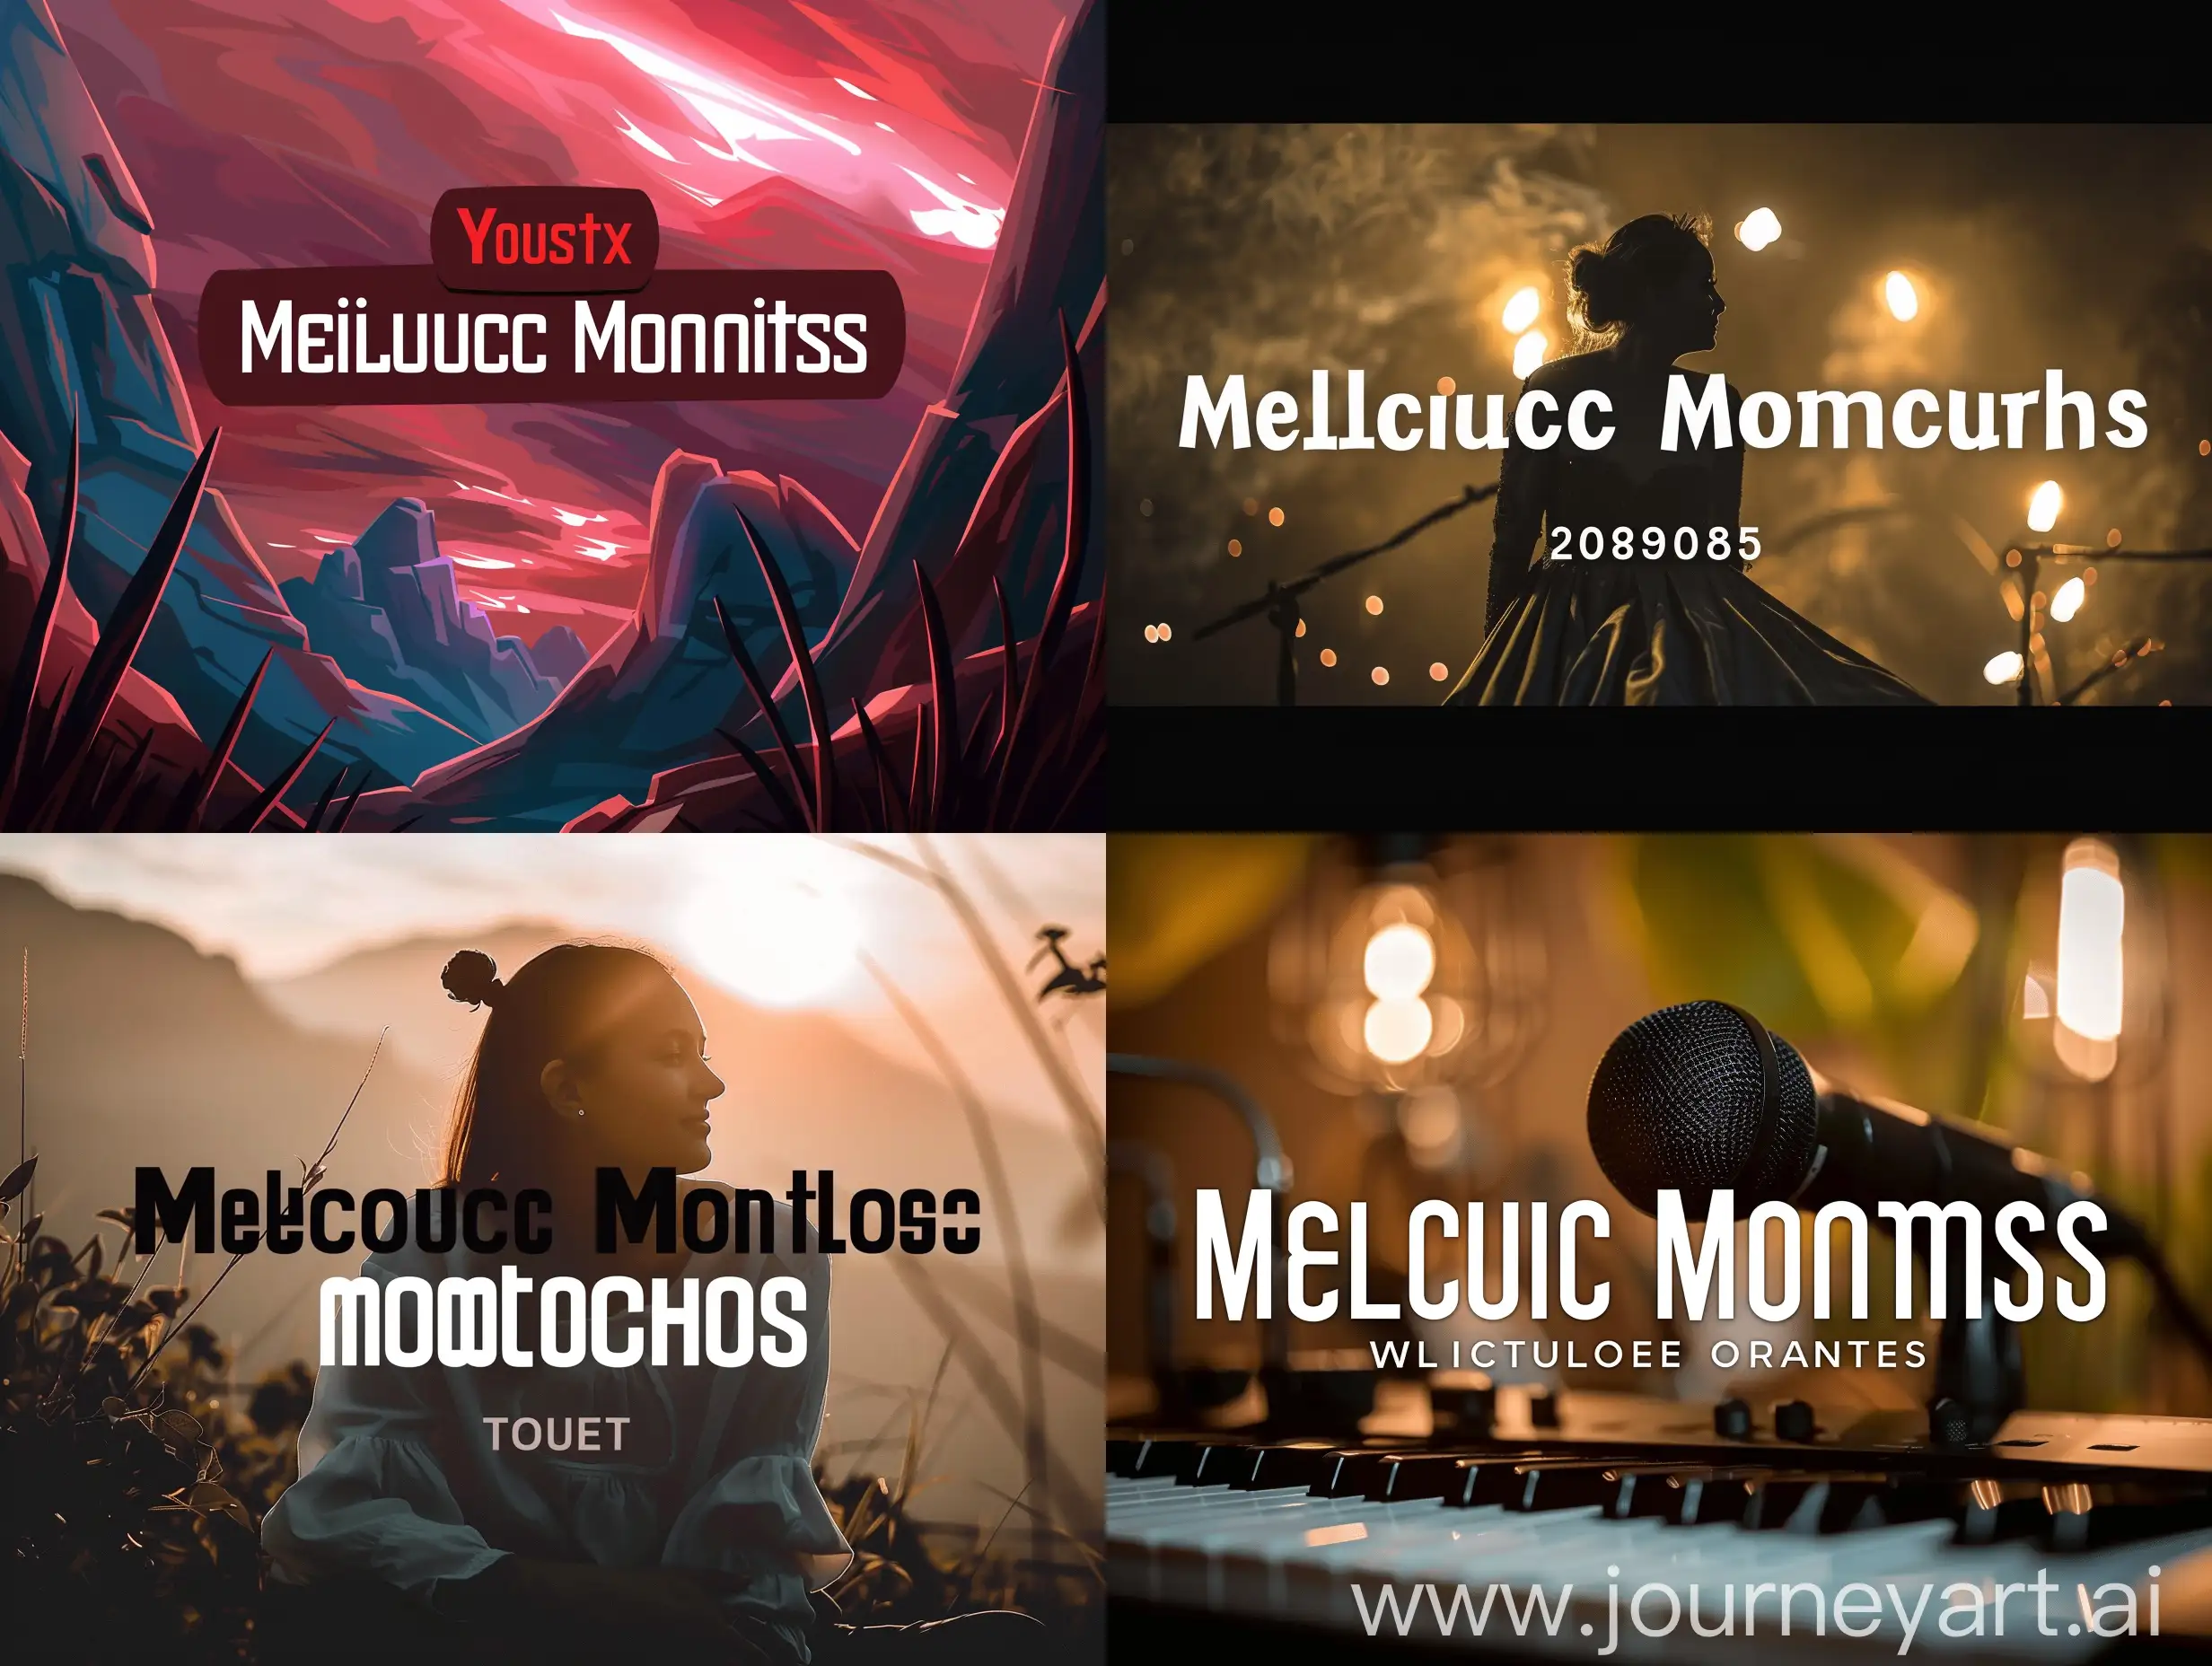 Vibrant-Melodic-Moments-Banner-for-YouTube-Channel-2048x1152